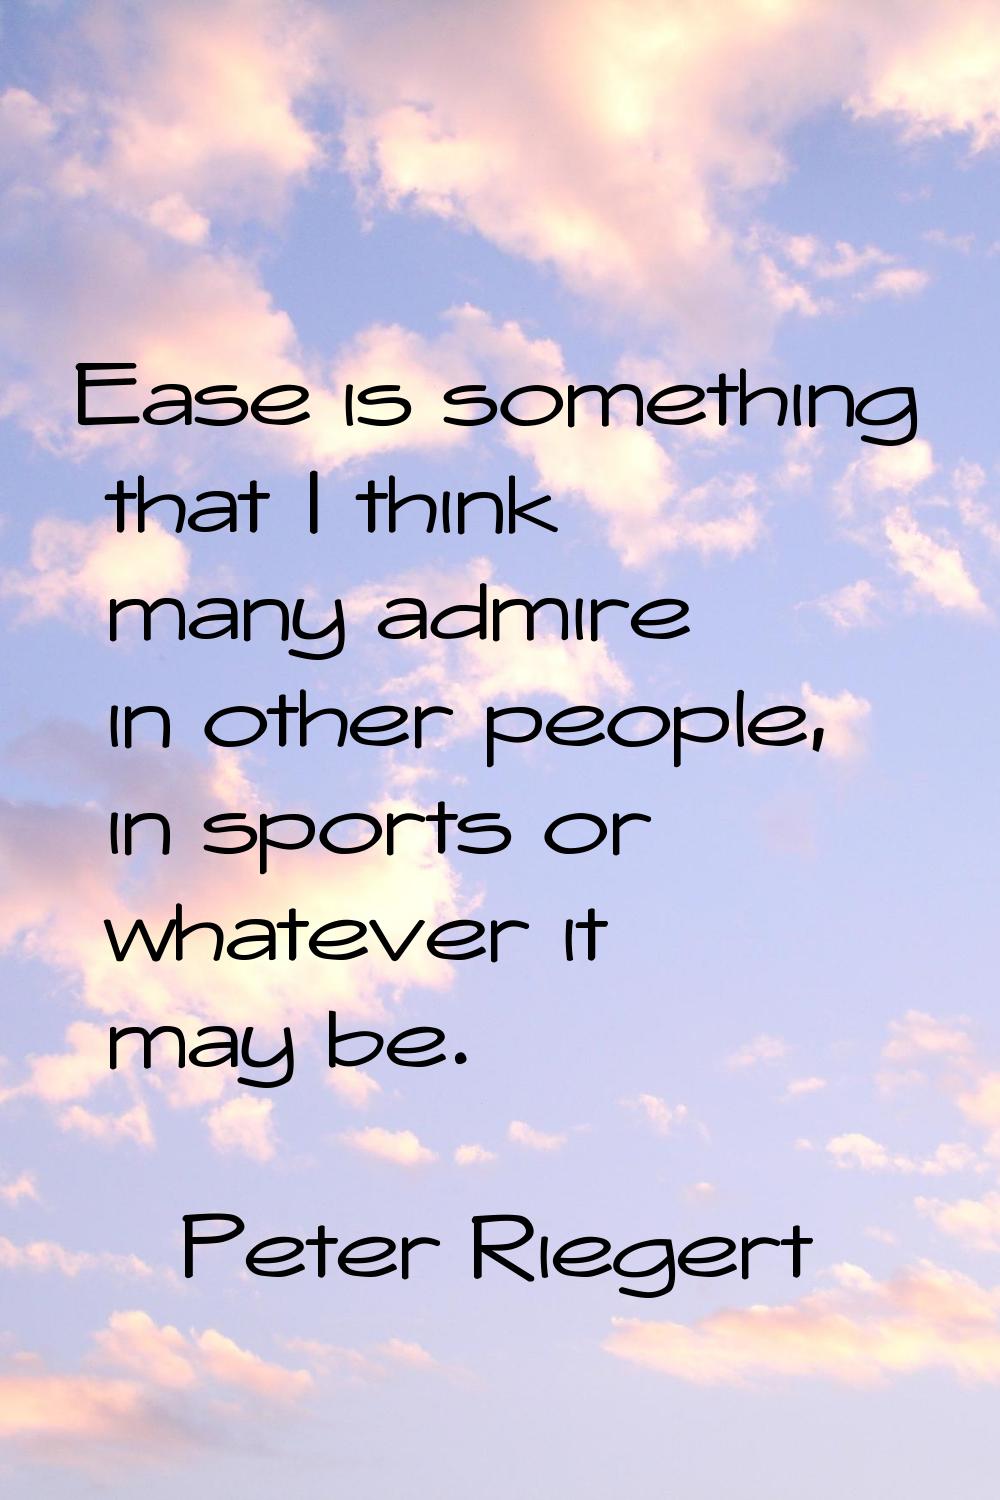 Ease is something that I think many admire in other people, in sports or whatever it may be.